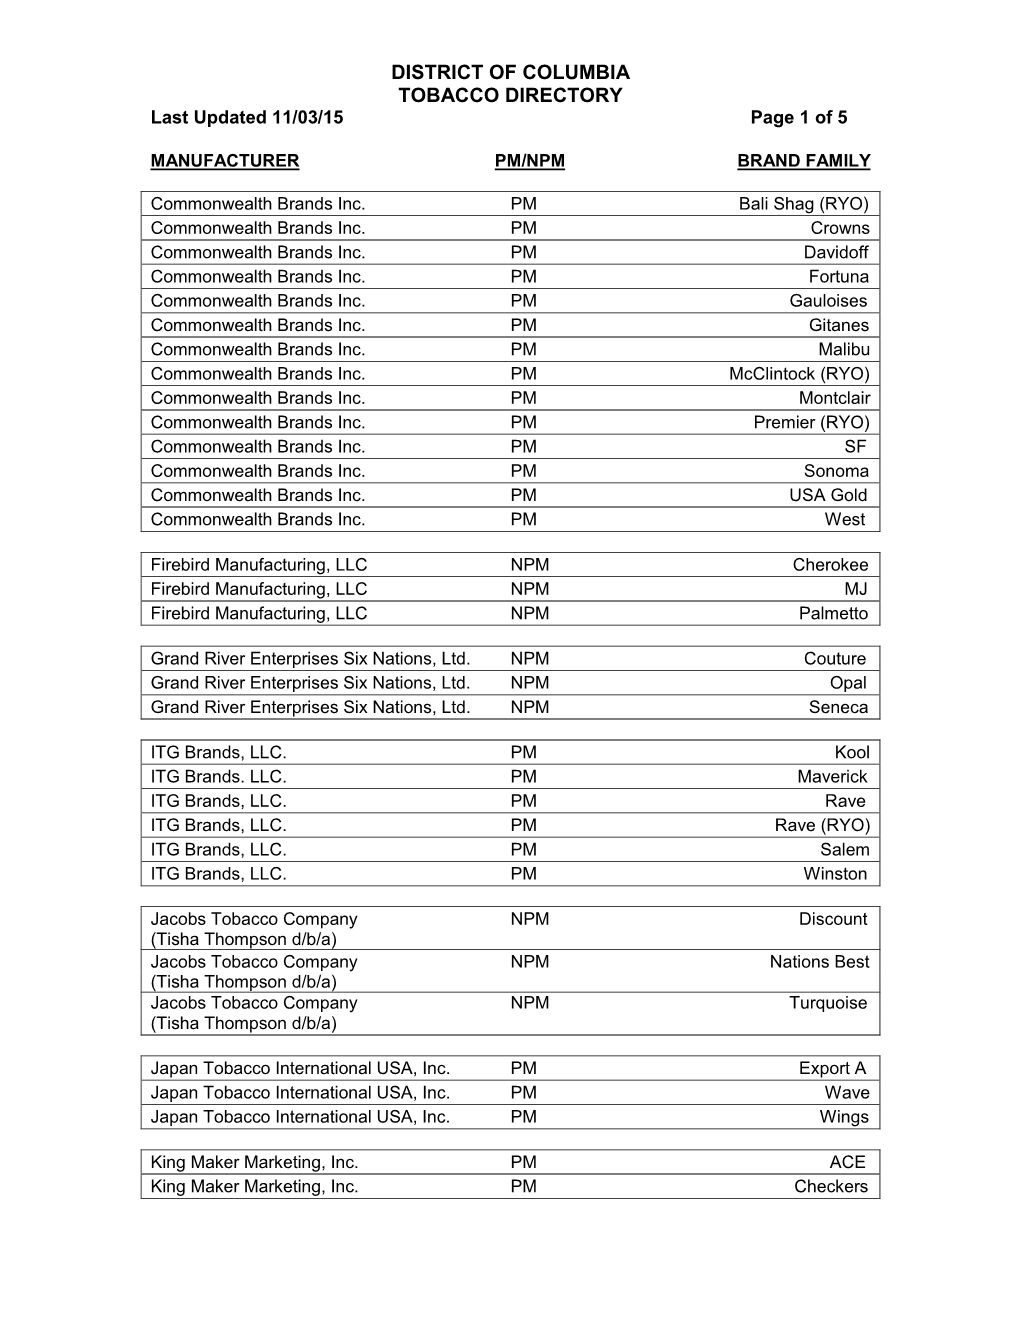 DISTRICT of COLUMBIA TOBACCO DIRECTORY Last Updated 11/03/15 Page 1 of 5